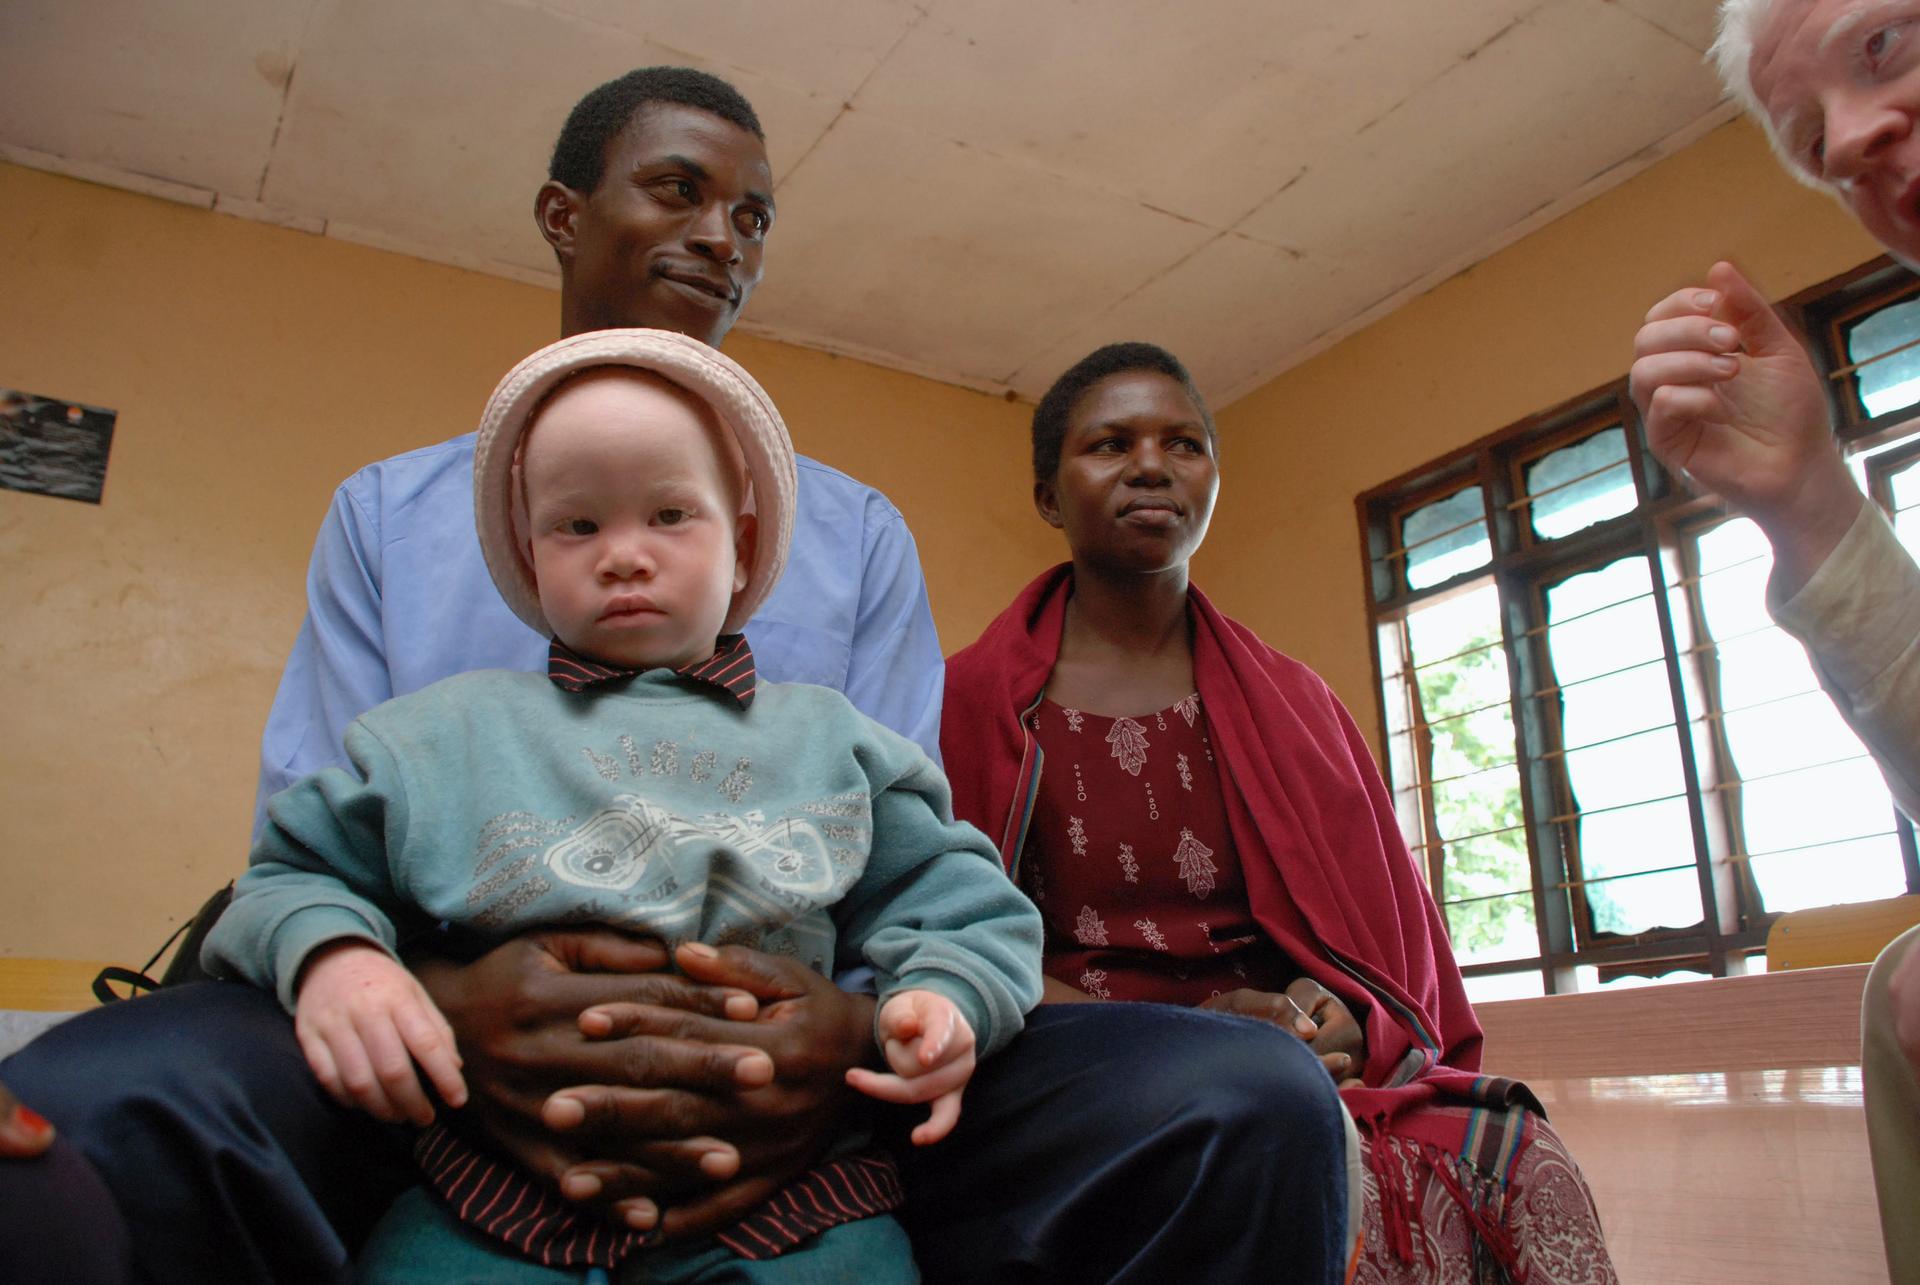 Elias Stariko (L) sits next to wife Farida Bwire, as he holds their son at the Golden Valley English Medium School, a school sponsored by Under the Same Sun (UTSS), in Geita November 24, 2011.